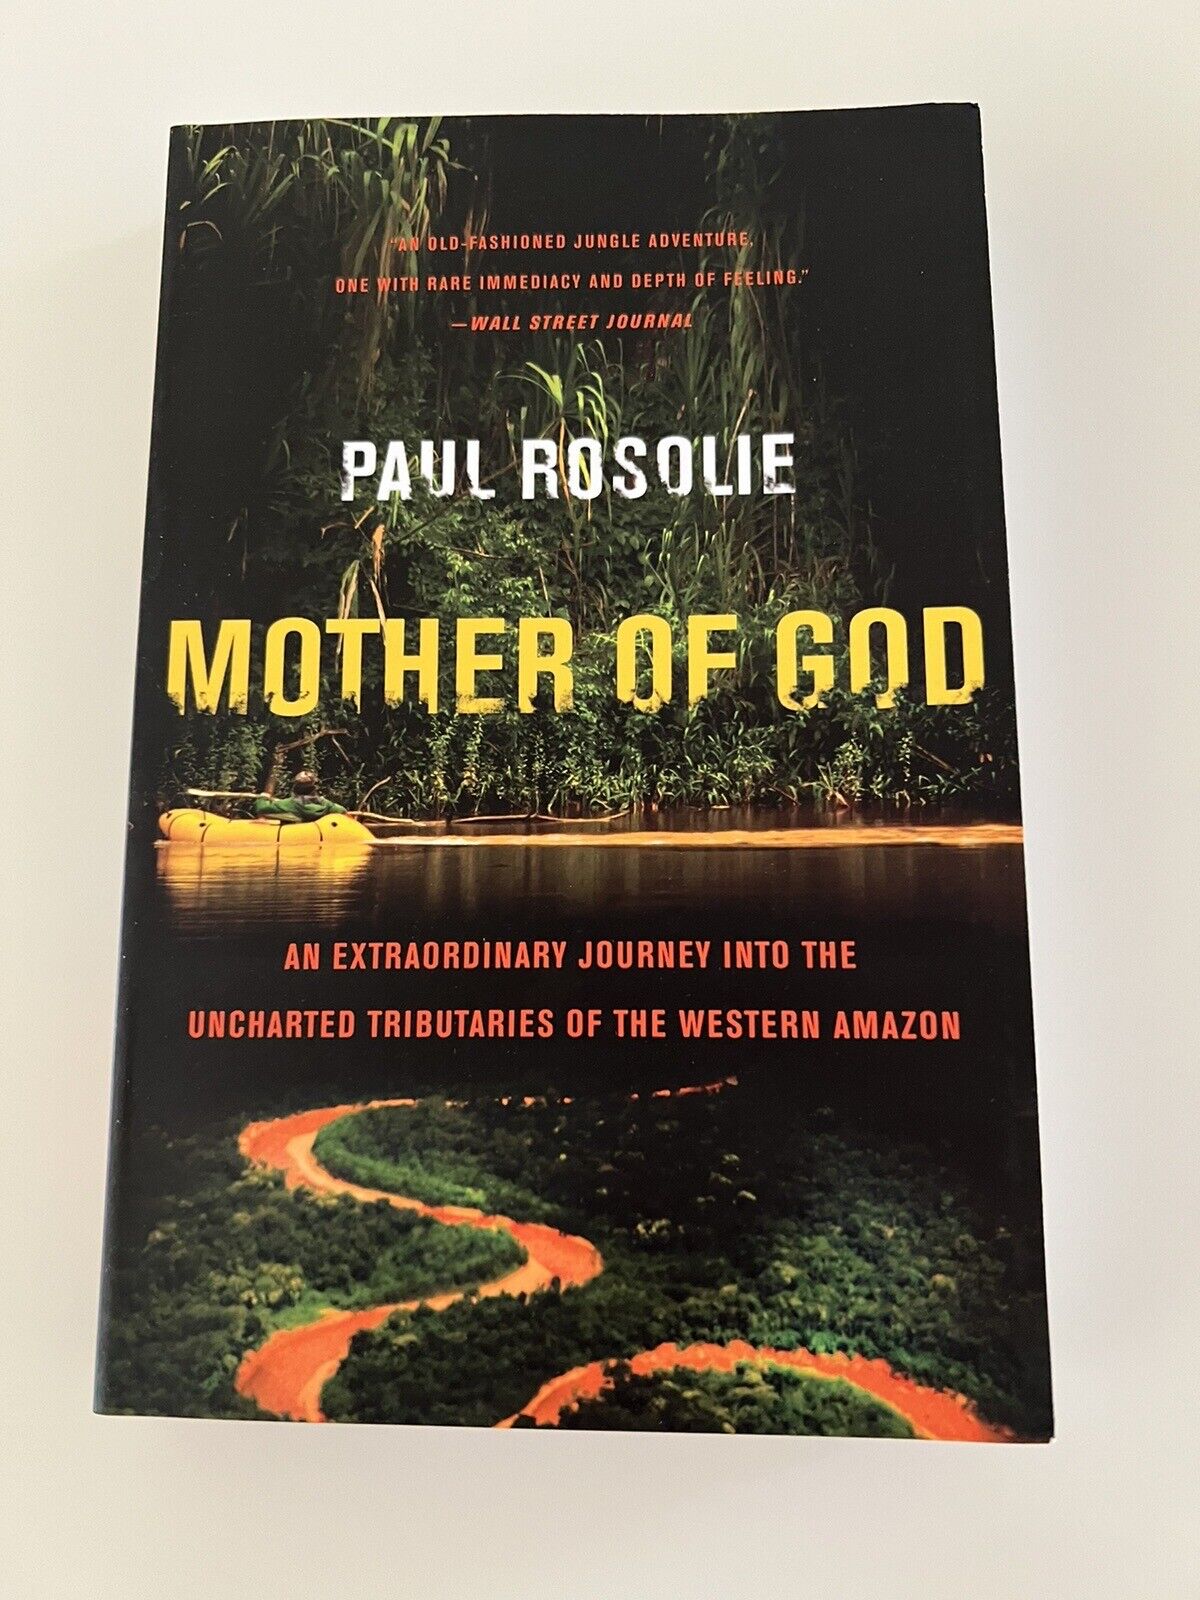 RARE - Mother of God by Paul Rosolie (as seen on JRE) - NEW - paperback book